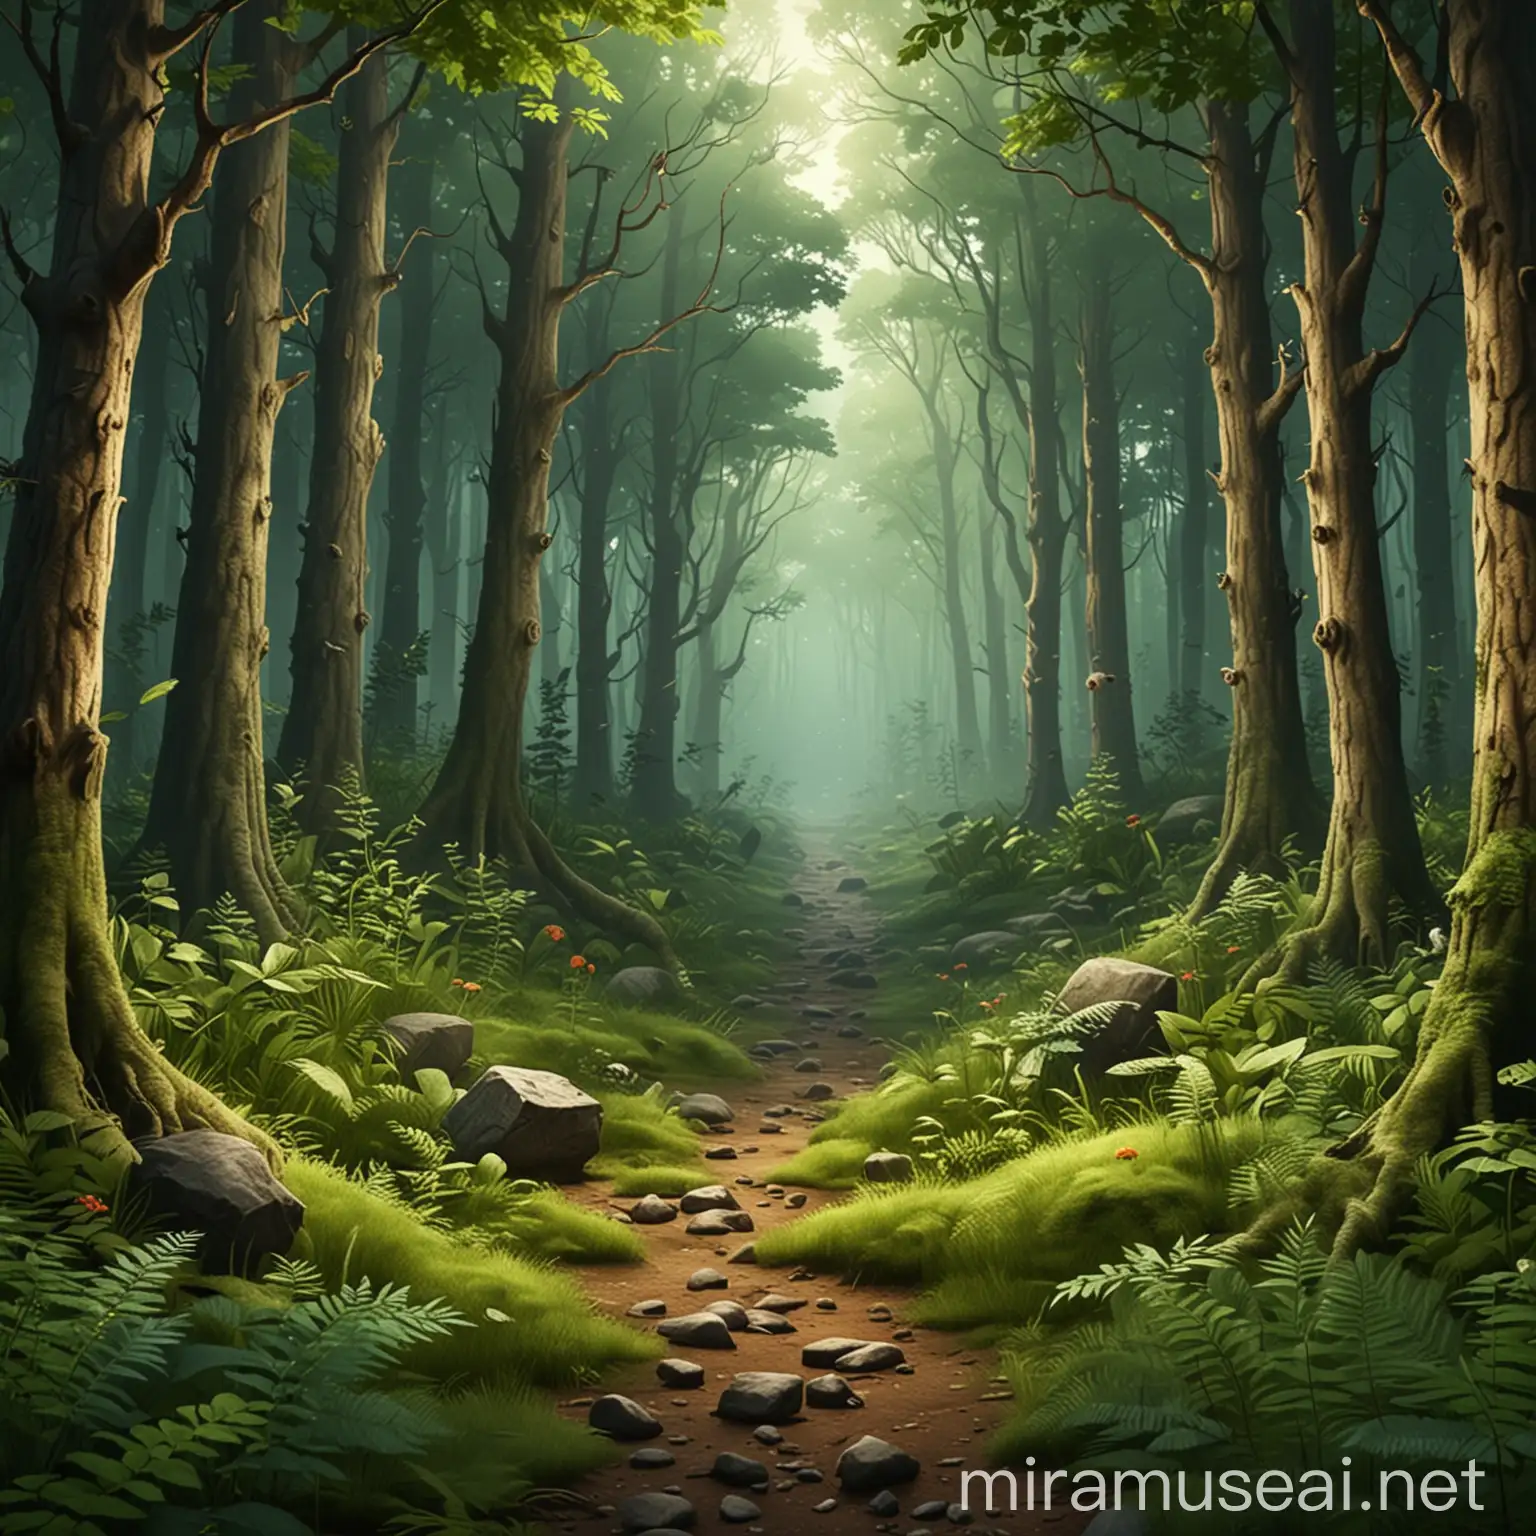 Forest Scene with Animals and Lush Greenery